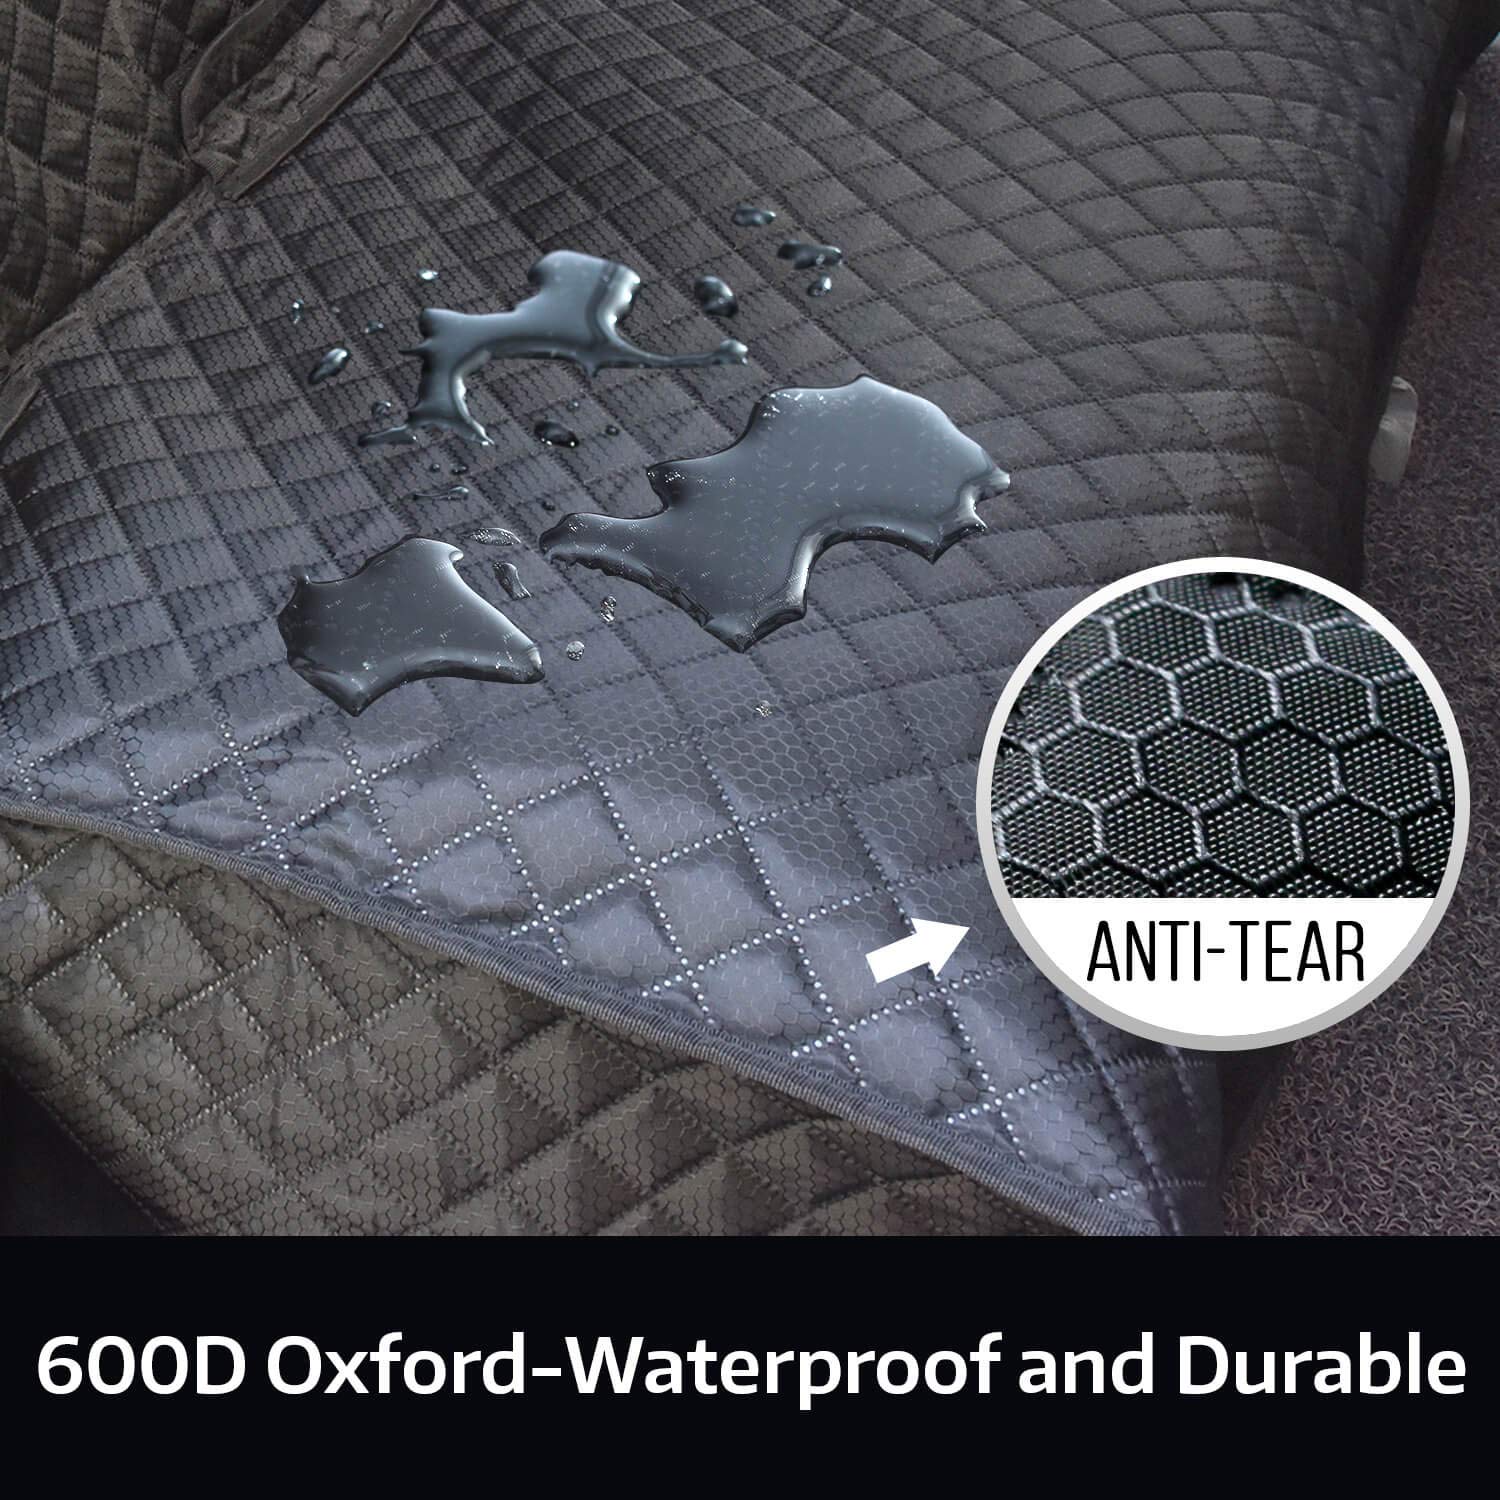 Vailge Bench Dog Seat Cover for Back Seat, 100% Waterproof Heavy-Duty & Nonslip Back Seat Cover for Dogs,Washable & Compatible Pet Car Seat Cover for Cars, Trucks & SUVs